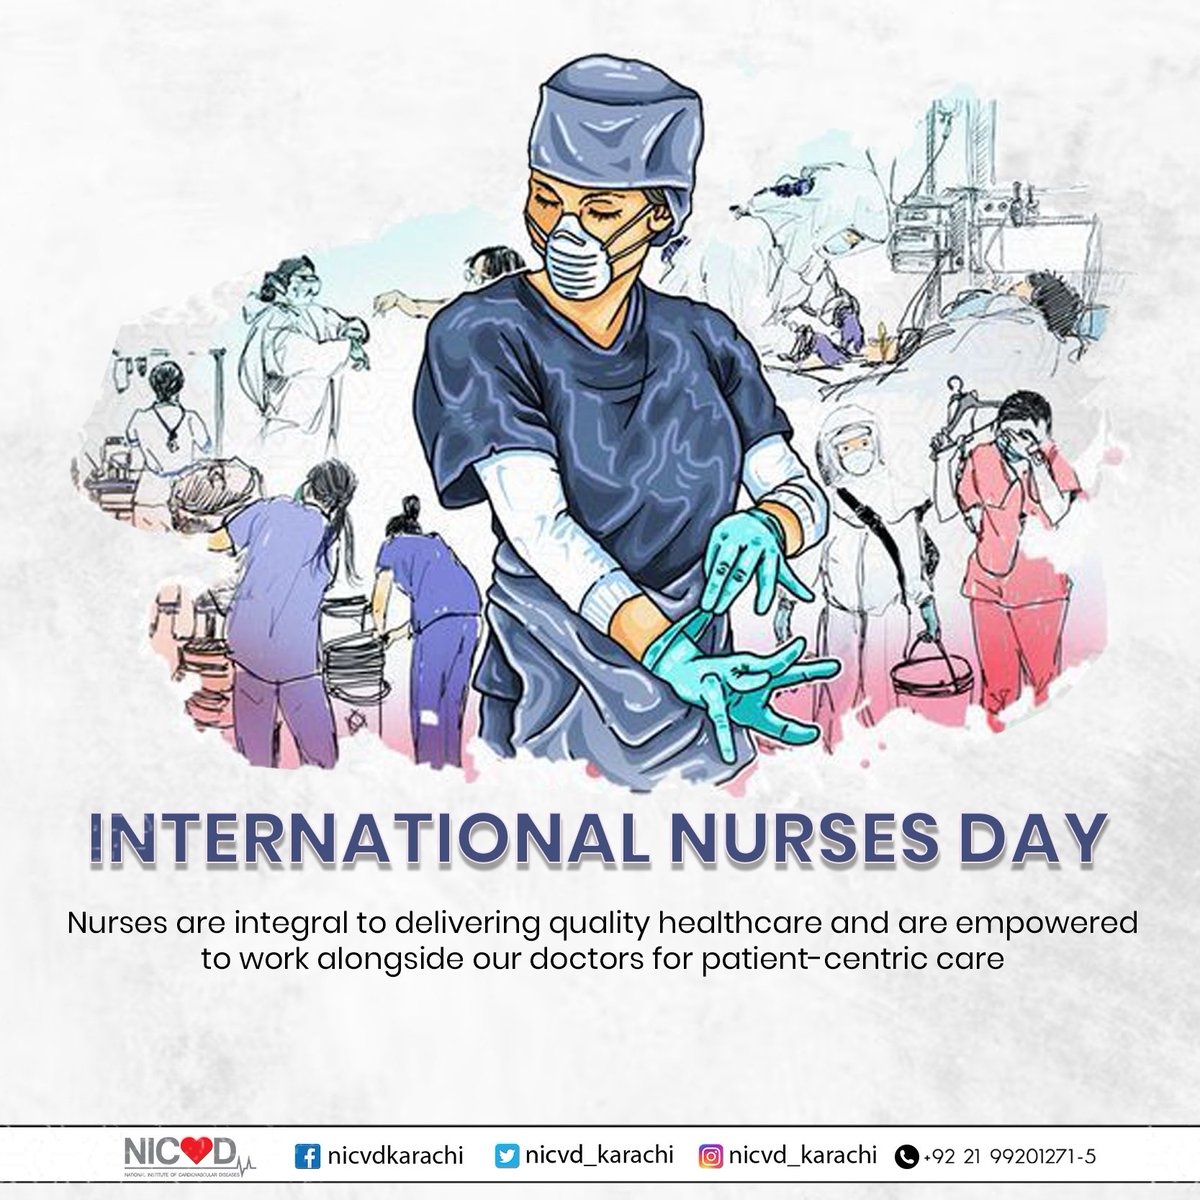 Acknowledging the invaluable contribution of nurses in delivering exceptional healthcare, collaborating with our doctors to ensure patient-focused care. #NICVD #InternationalNursesDay #NursesDay